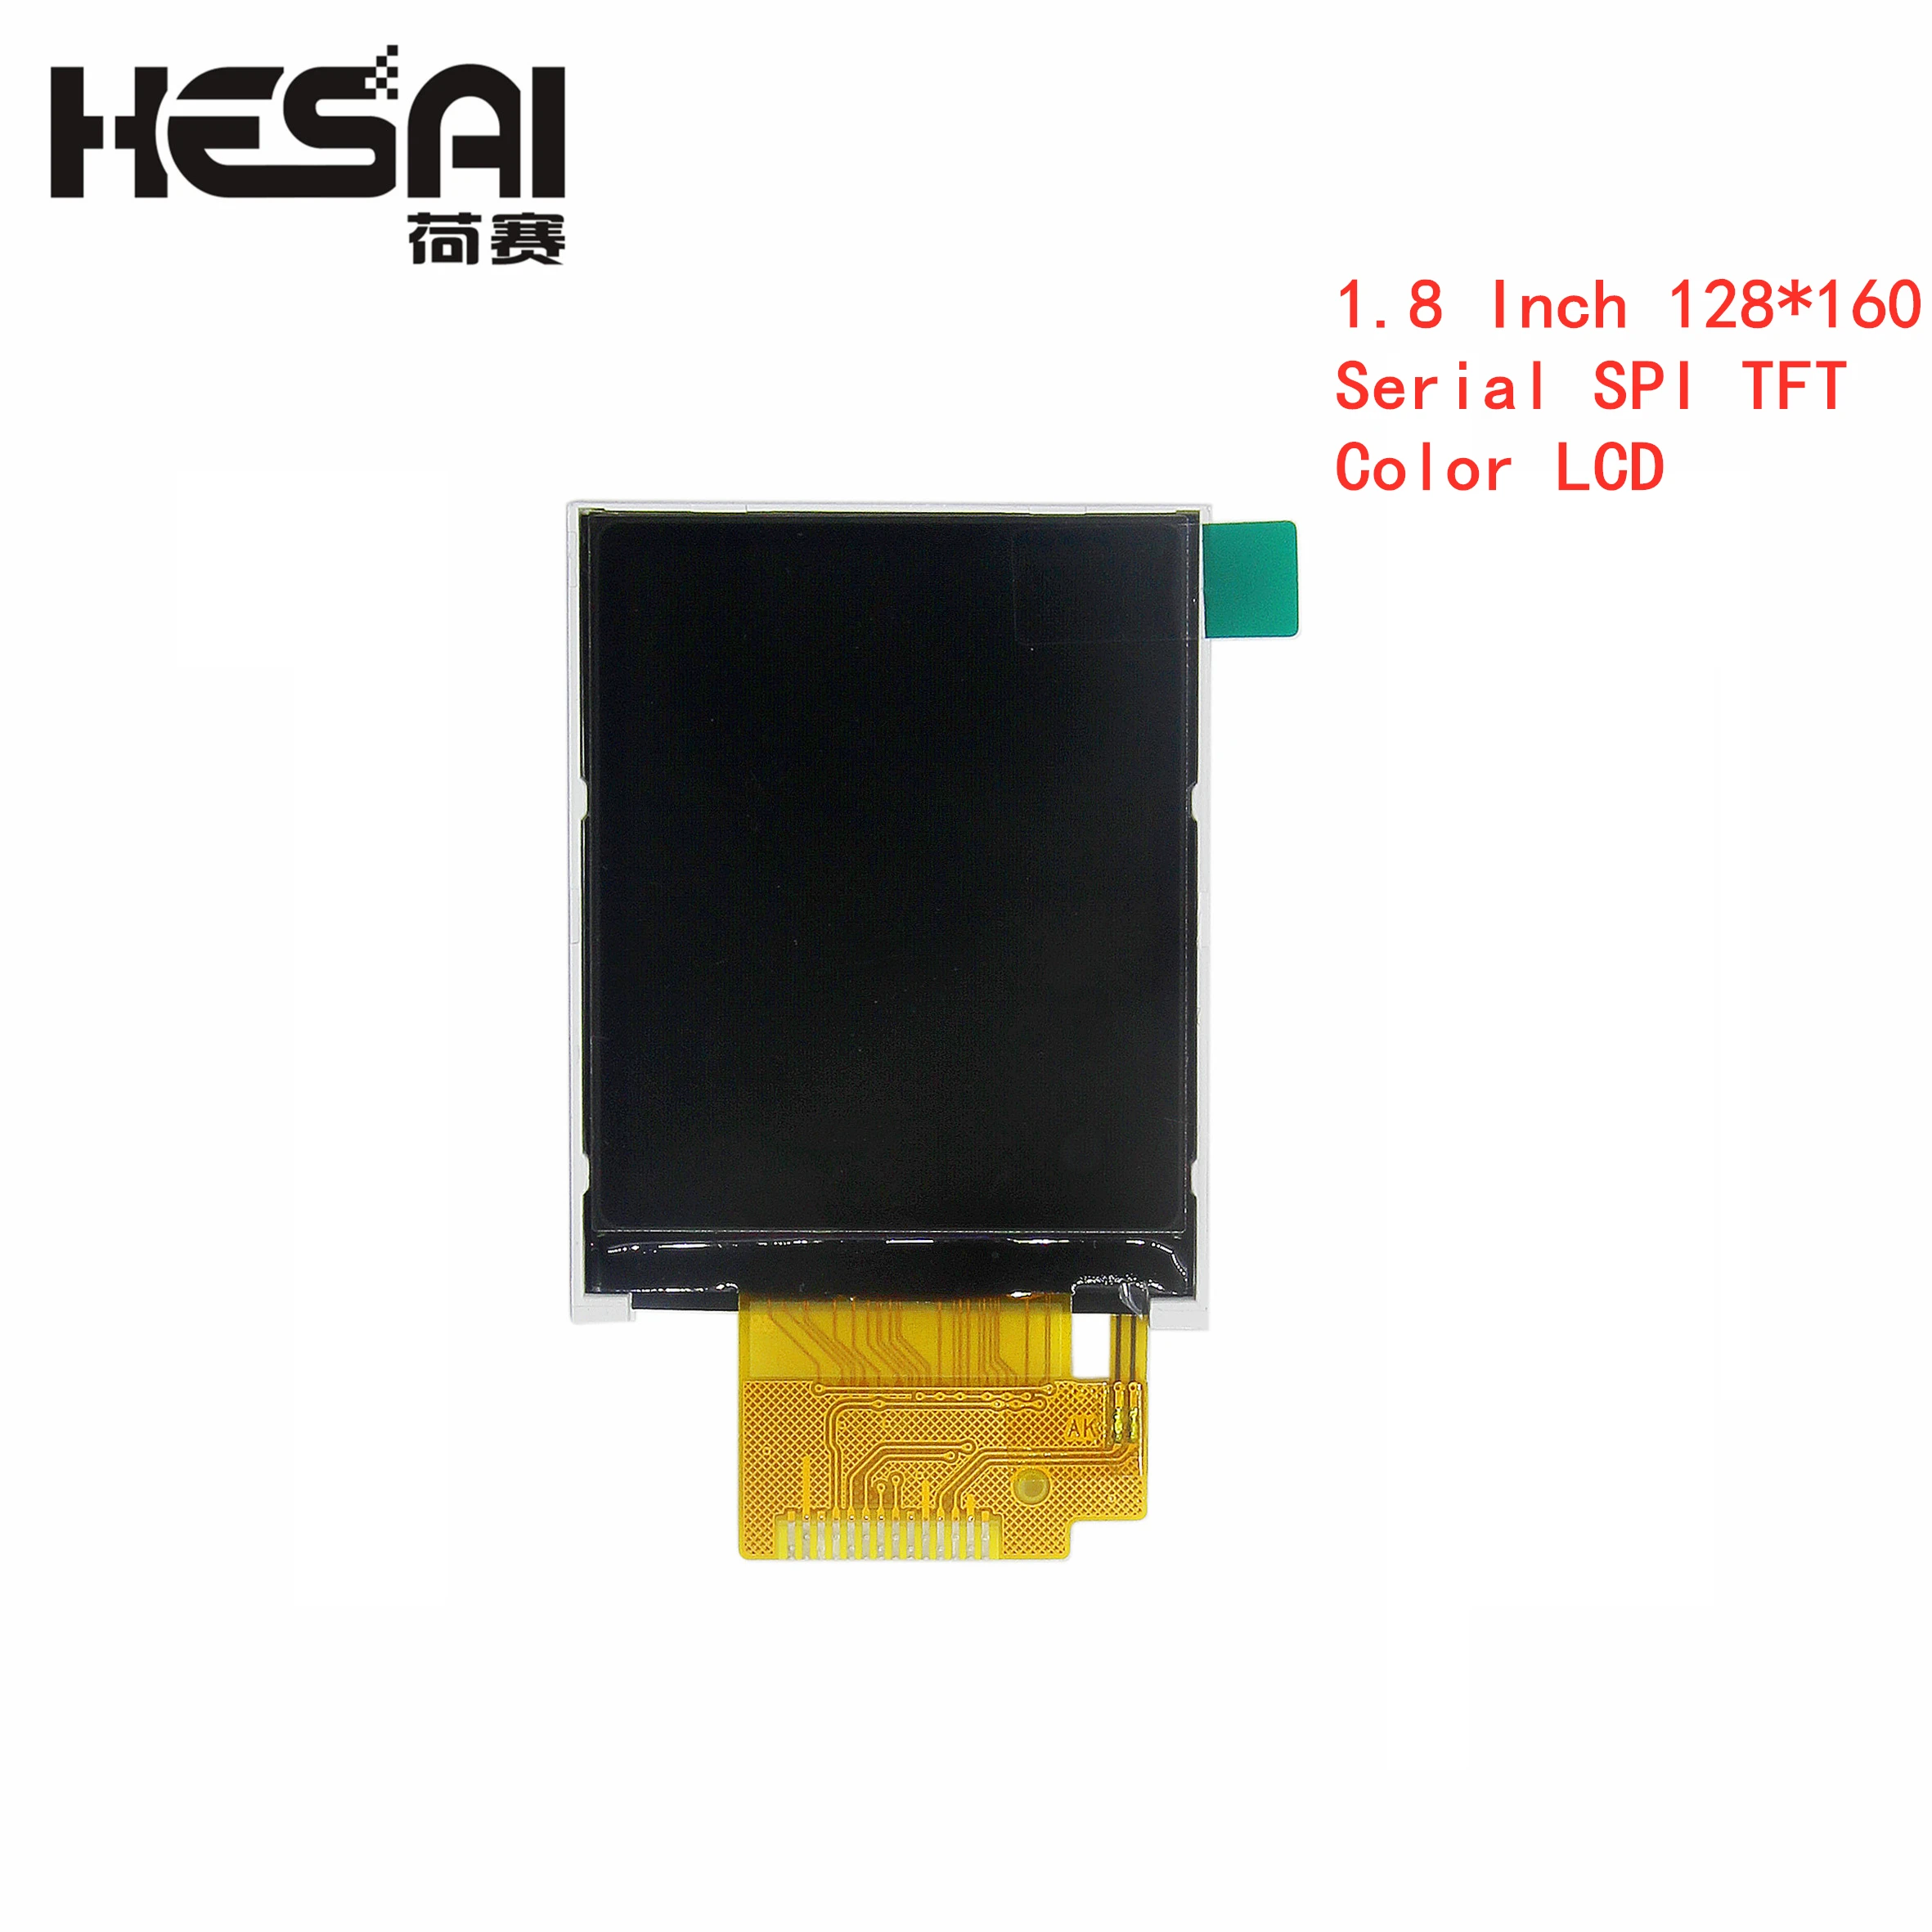 1.8 Inch 128*160 Serial SPI TFT Color LCD Module 128x160 Display ST7735 With SPI Interface 5 IO Ports for arduino Diy Kit